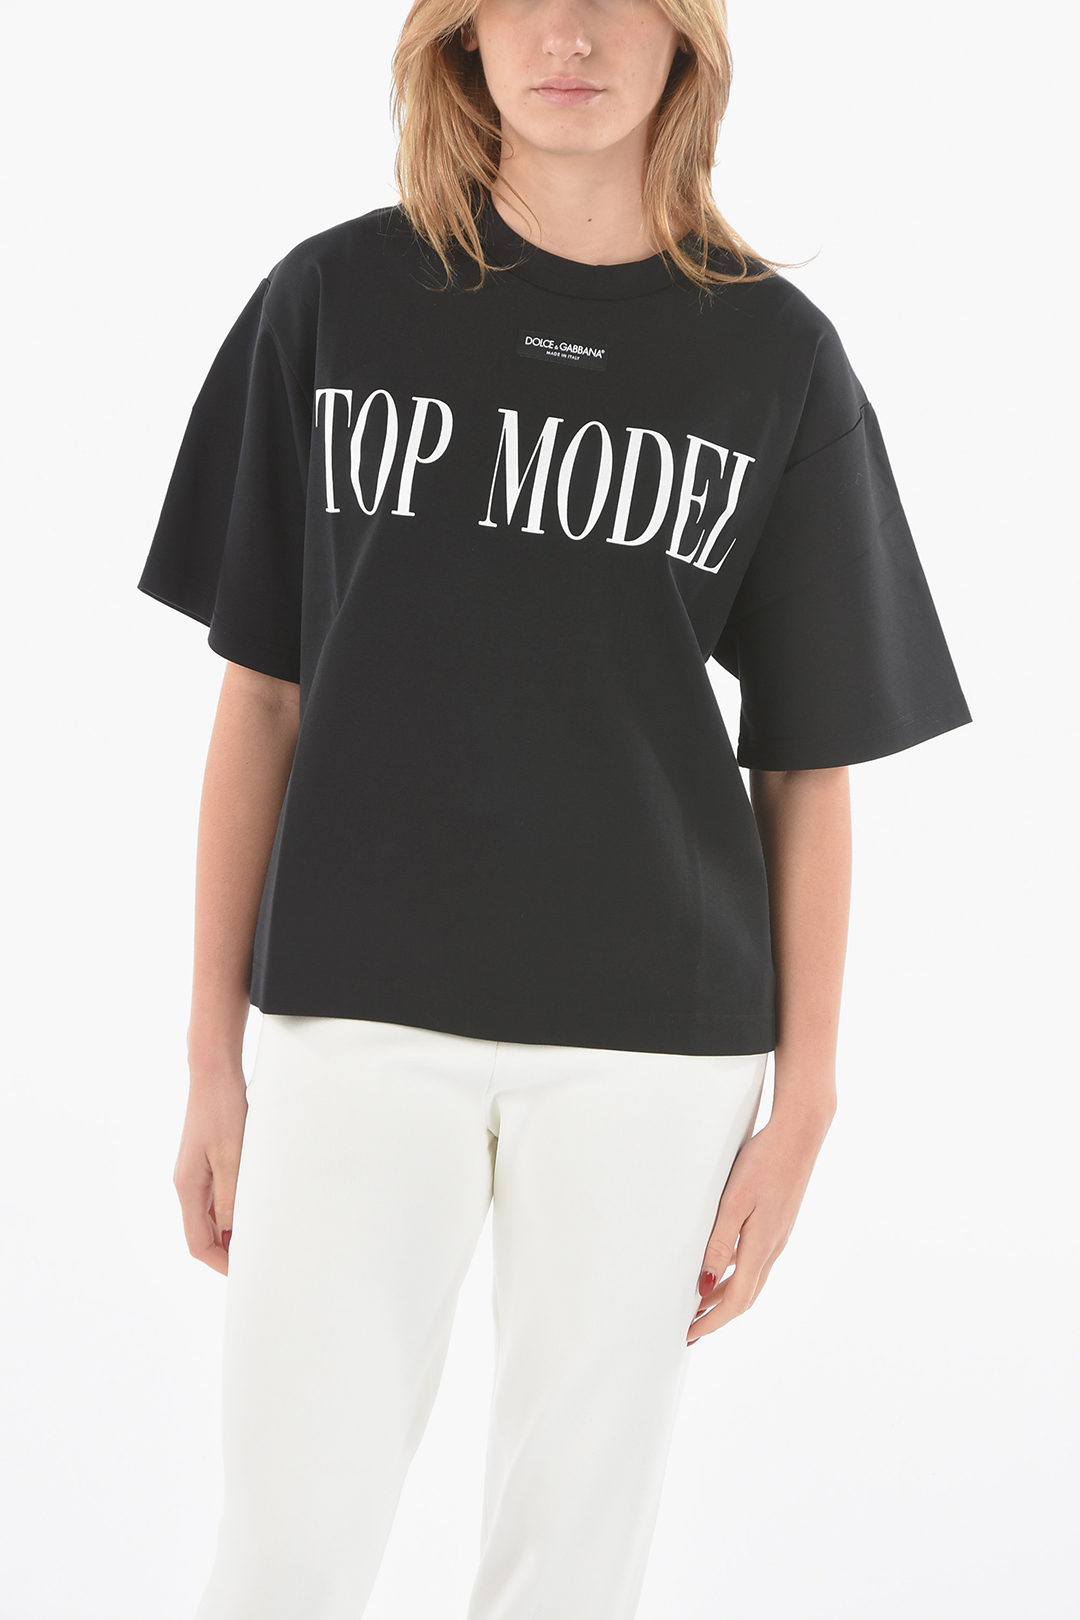 Dolce & Gabbana Crewneck TOP Outlet - MODEL with T-shirt women Glamood Lettering Print